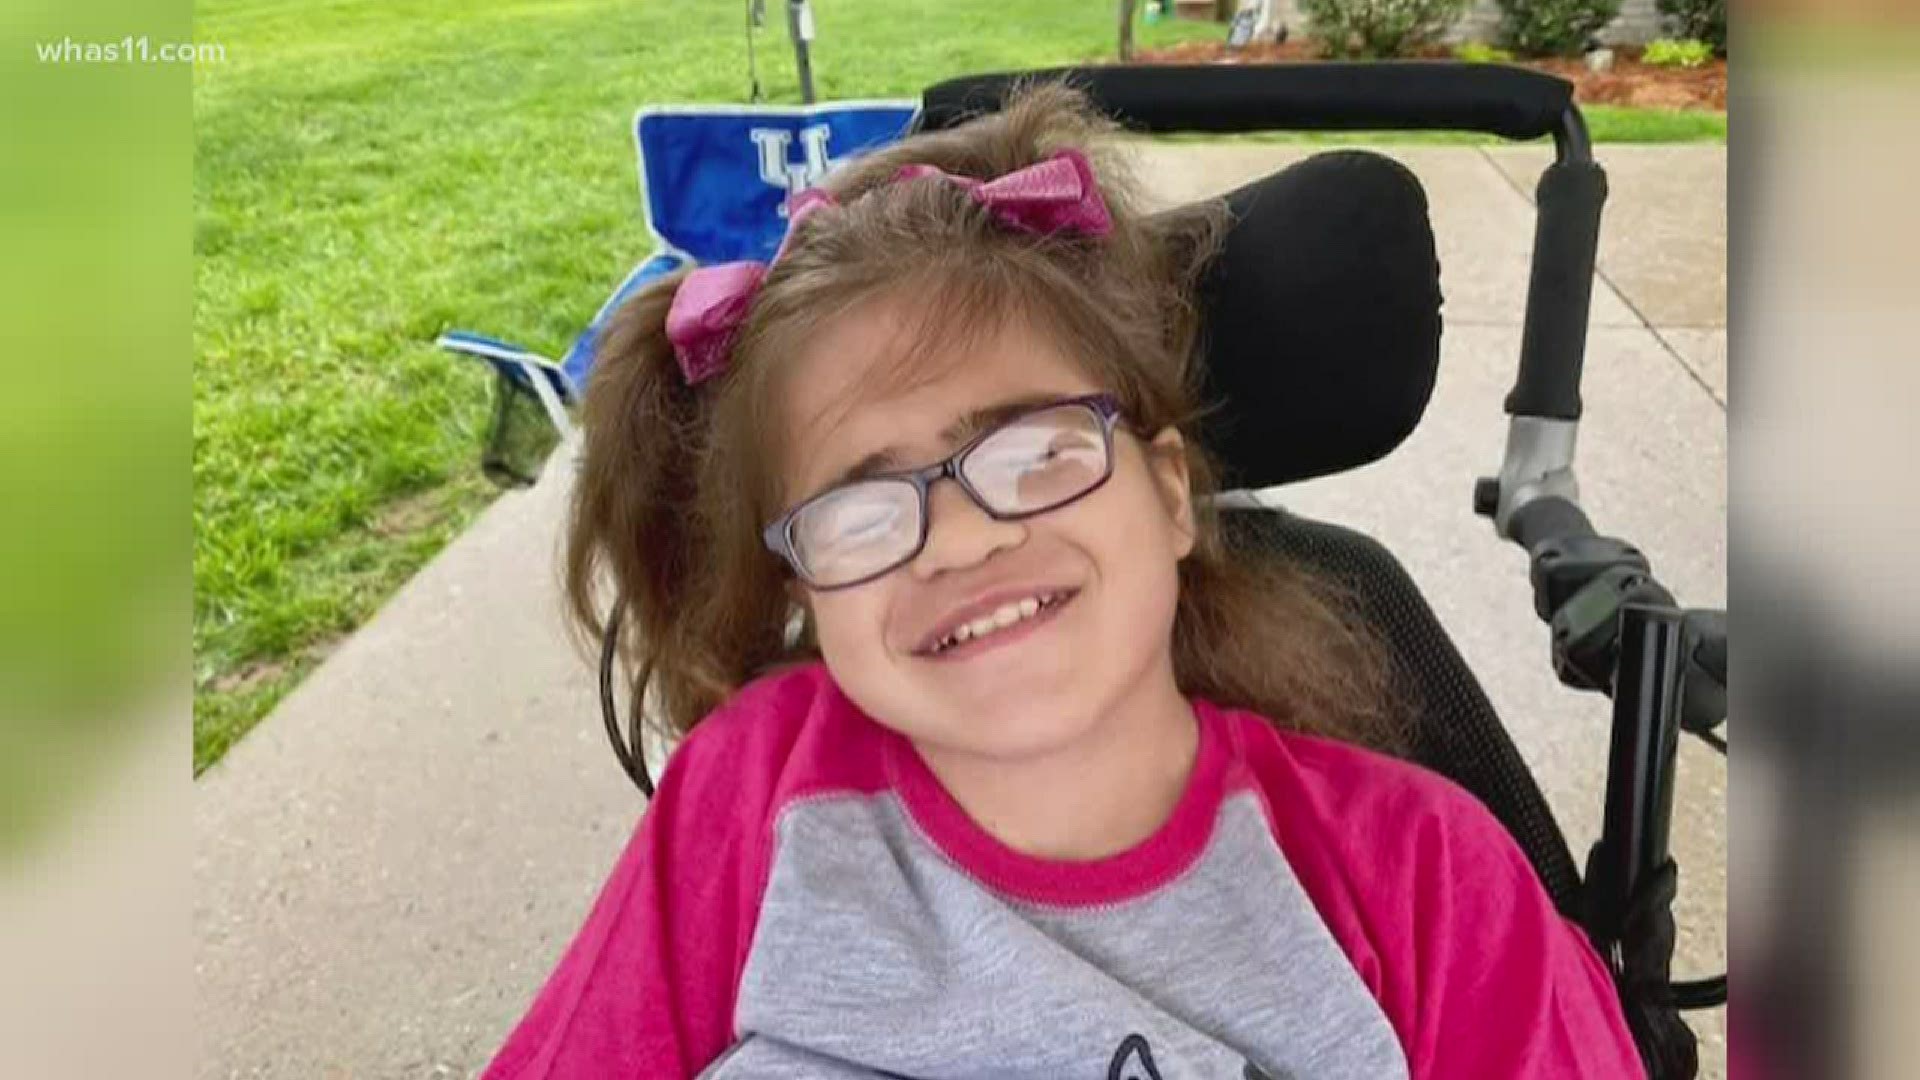 Friends and neighbors of Karsyn Wallace made sure she celebrated in style by throwing her a drive-by parade.